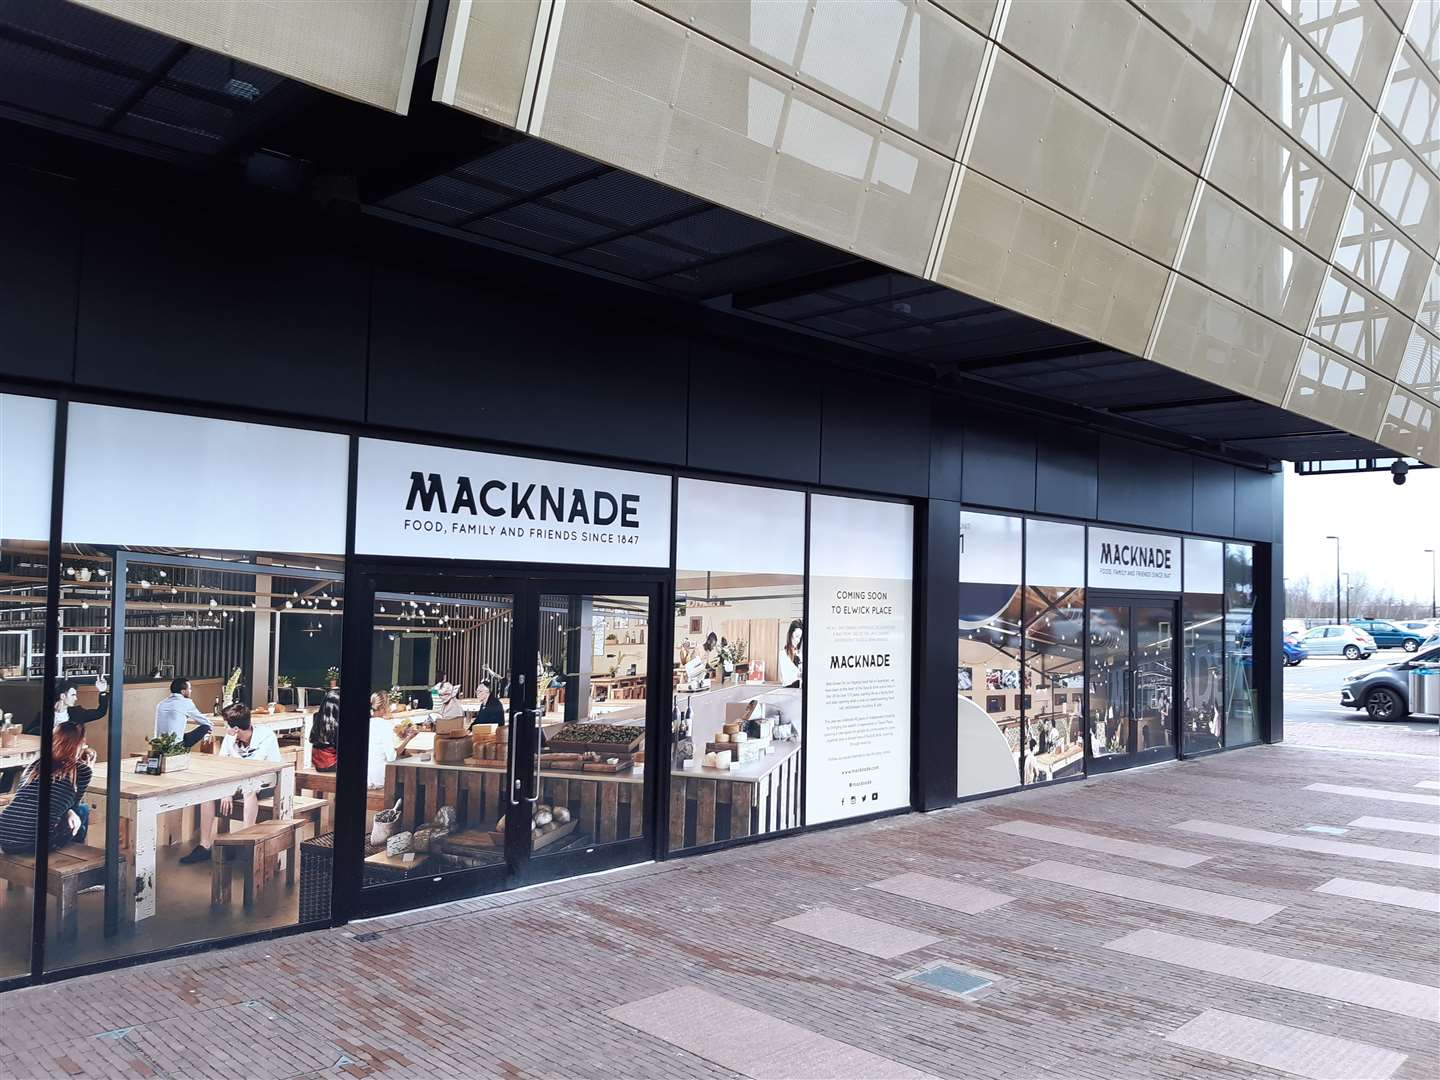 Macknade will be reopening its Elwick Place branch in the next couple of weeks